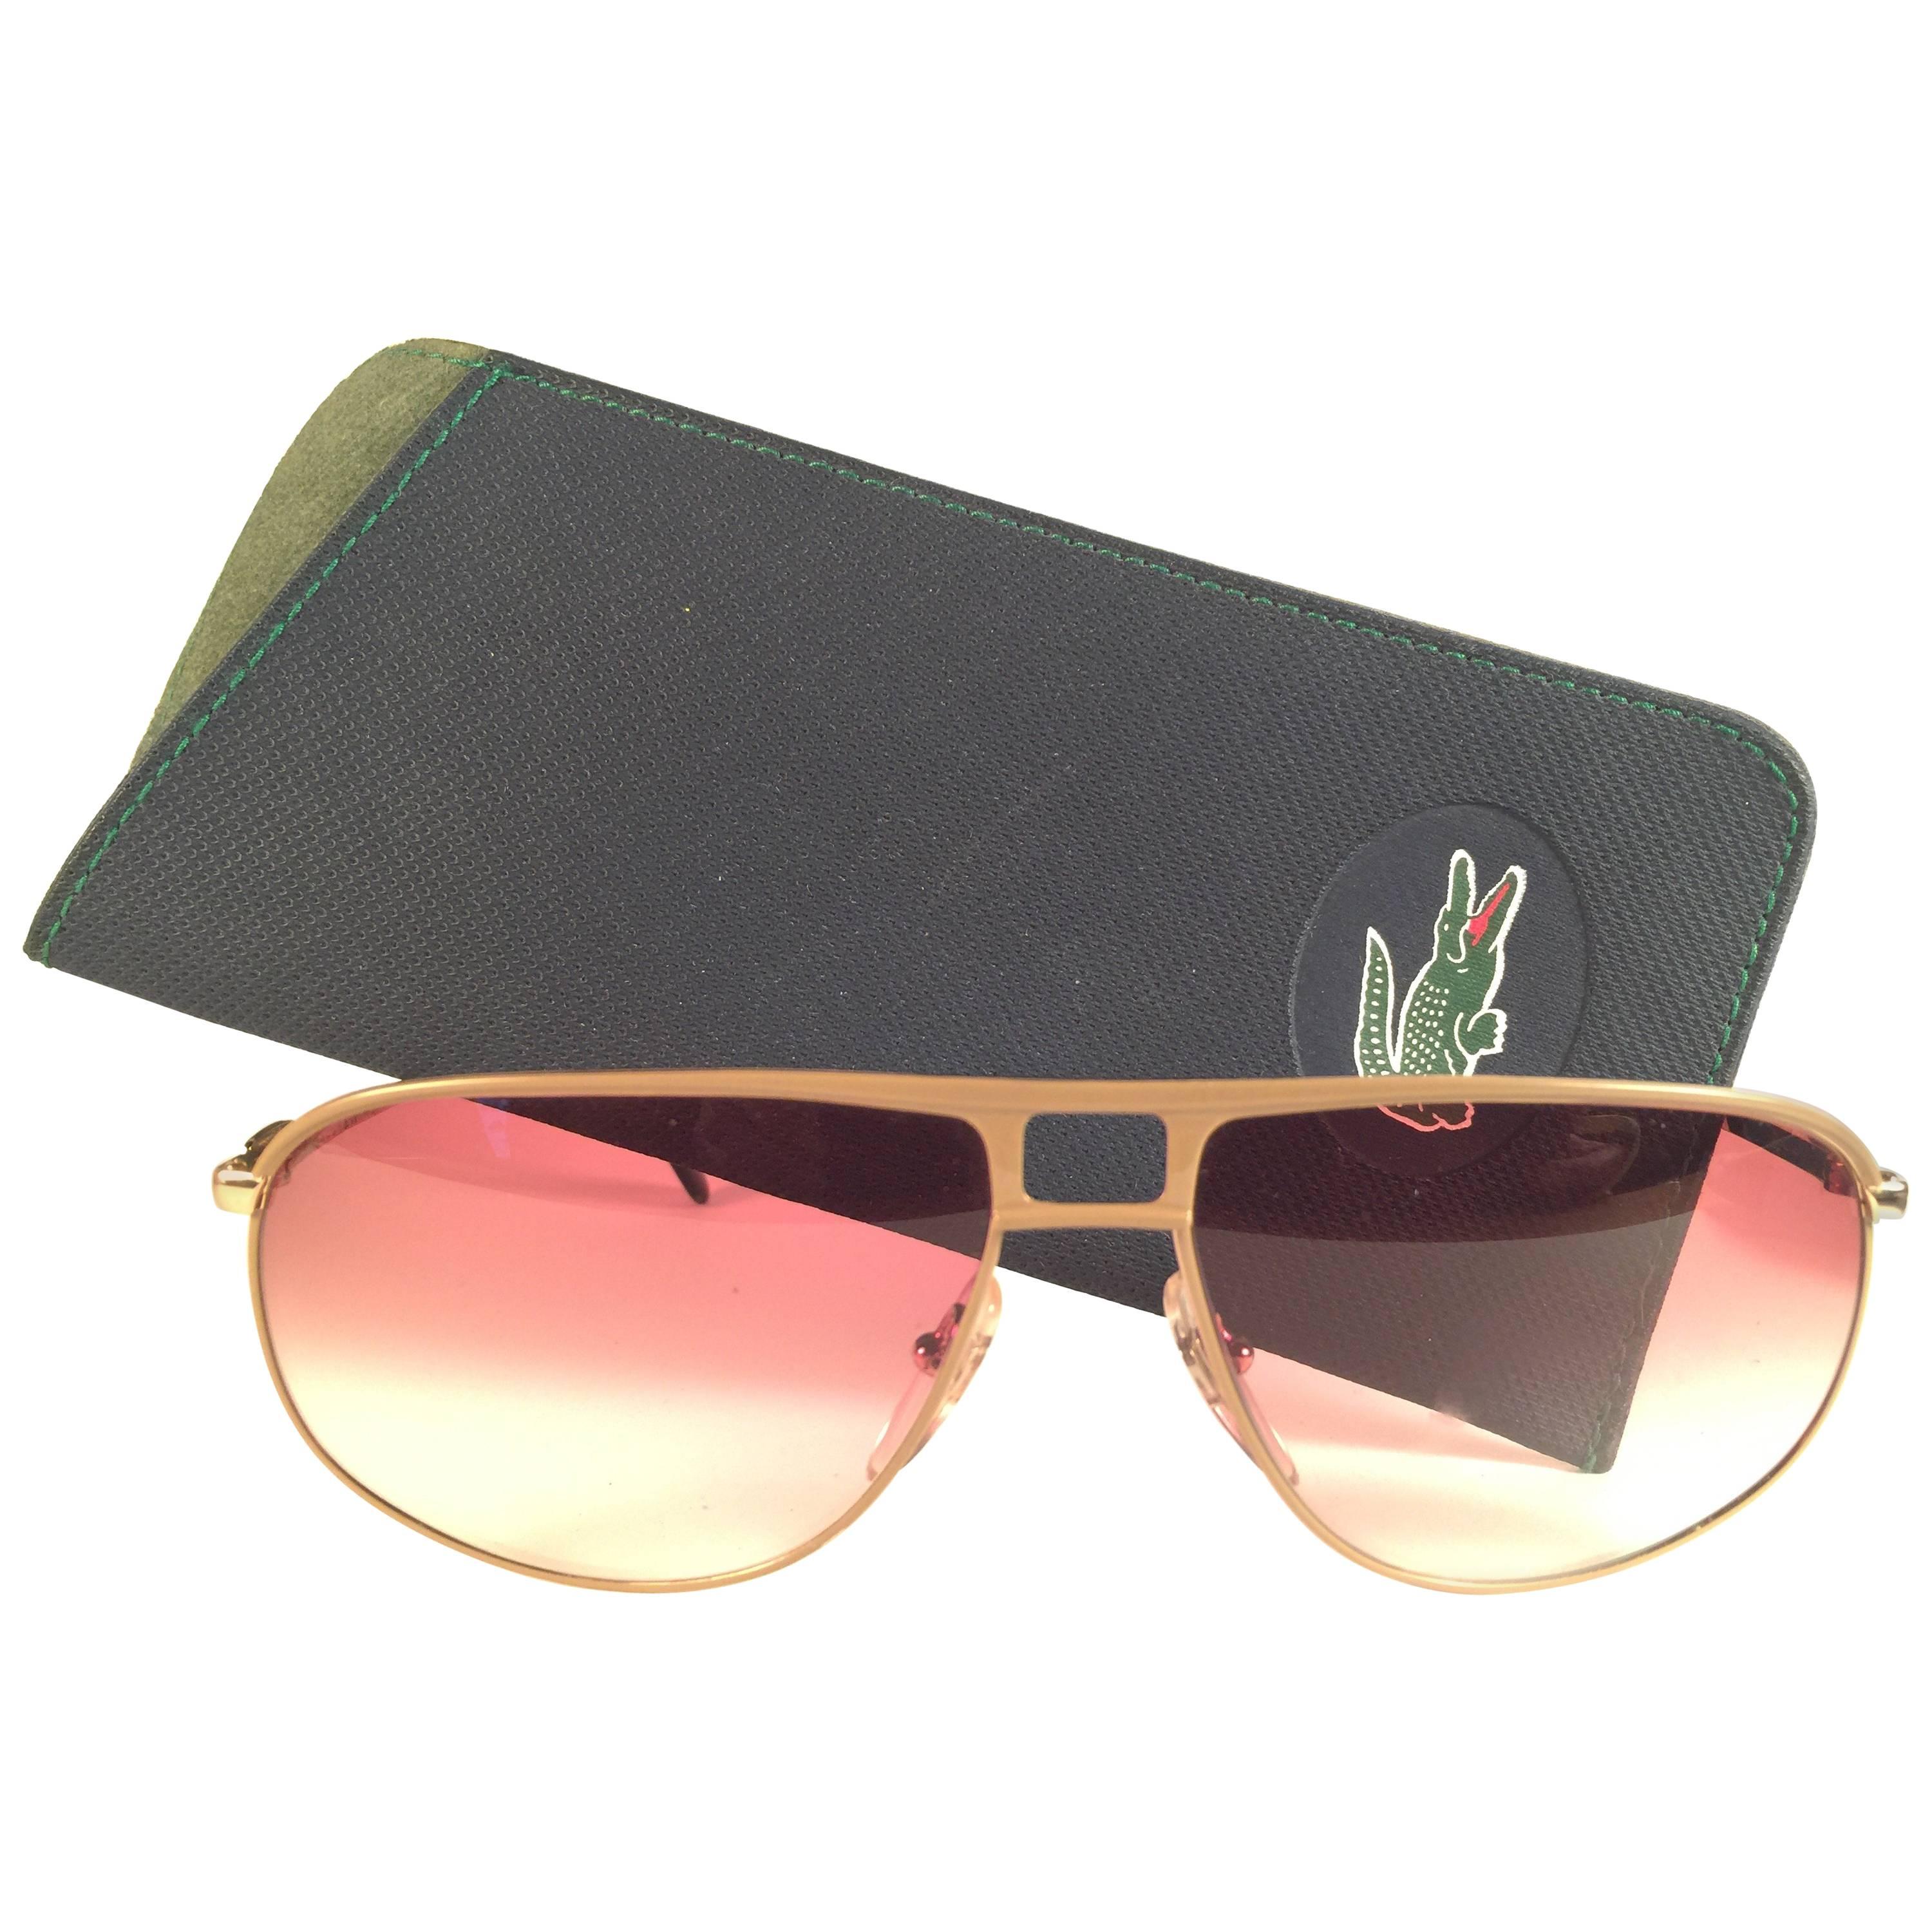 New Vintage Lacoste Gold Rose Gradient 1980's Sunglasses Made in France 